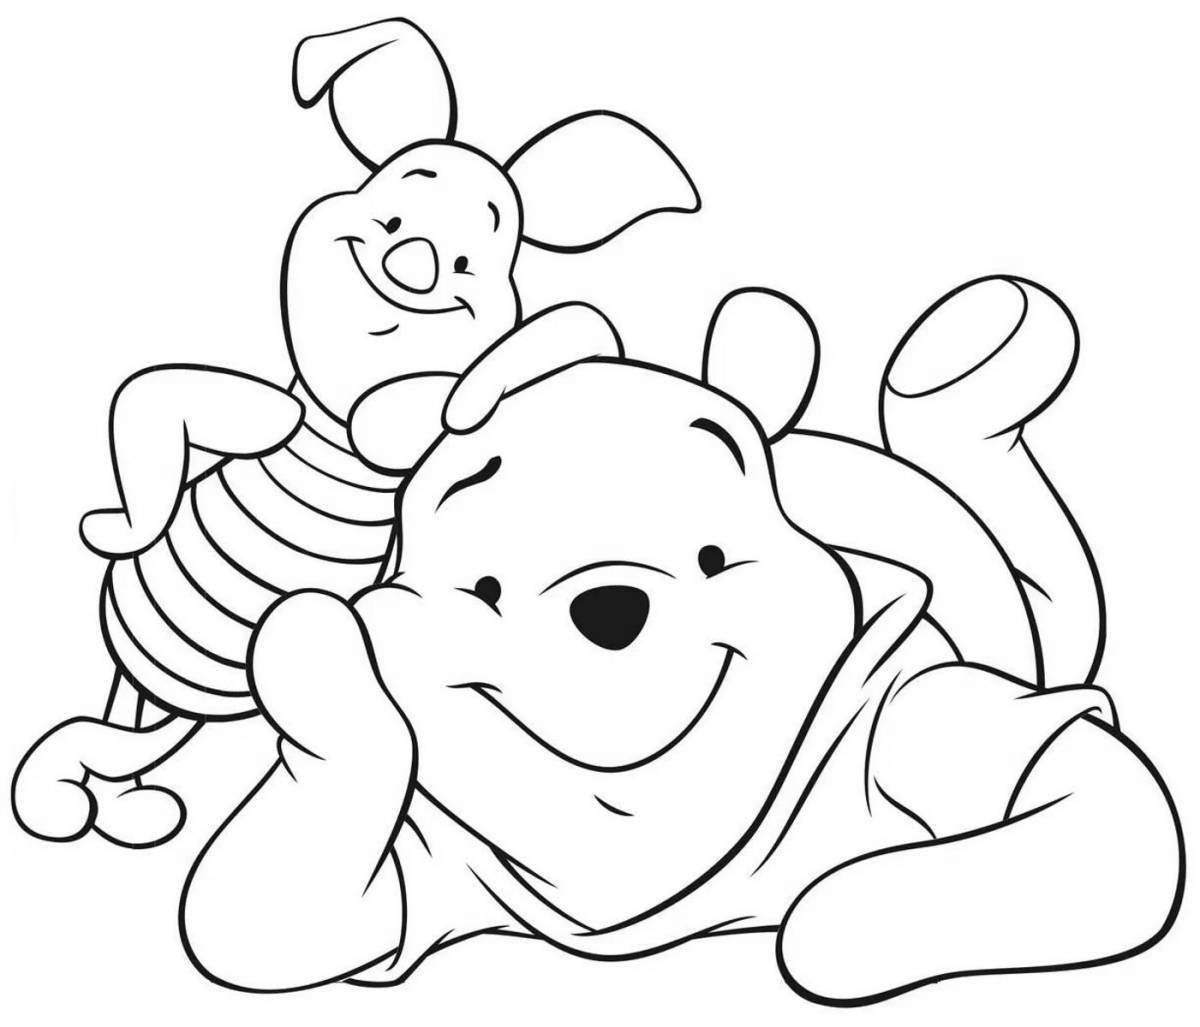 Vinnie fairy coloring page